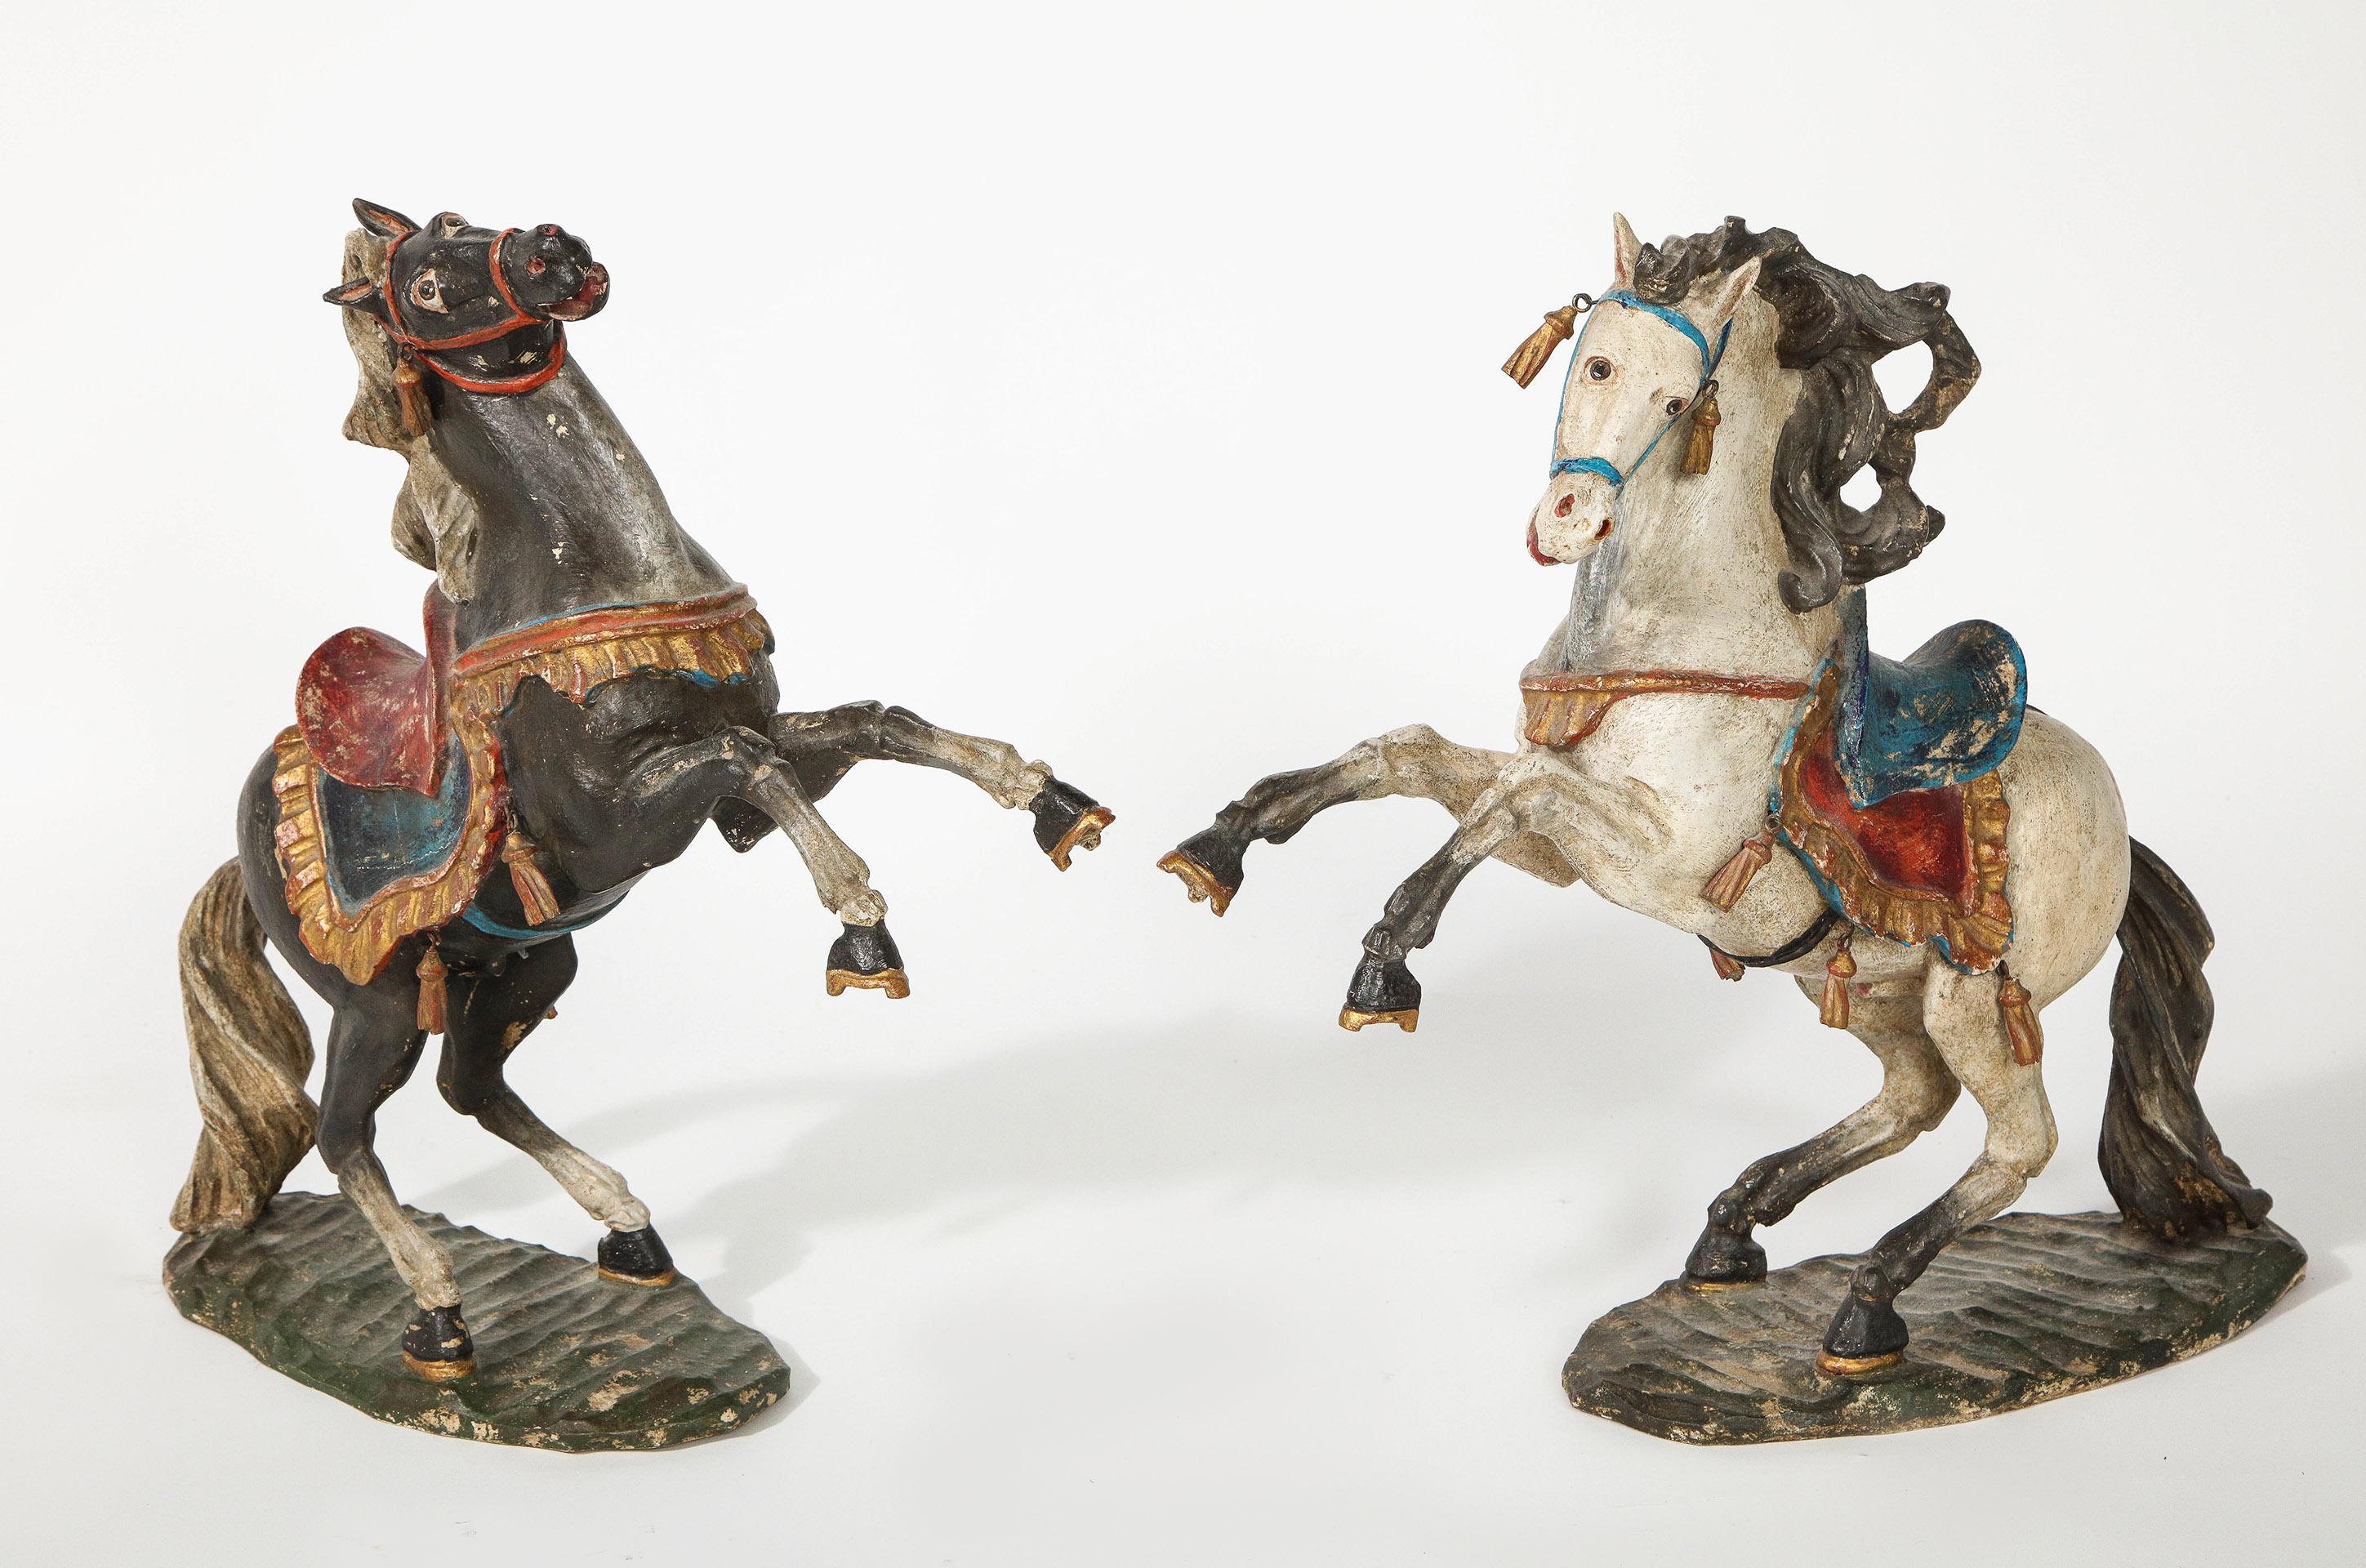 Polychromed Pair of 18th Century Italian Carved Fruitwood Polychrome Horses For Sale